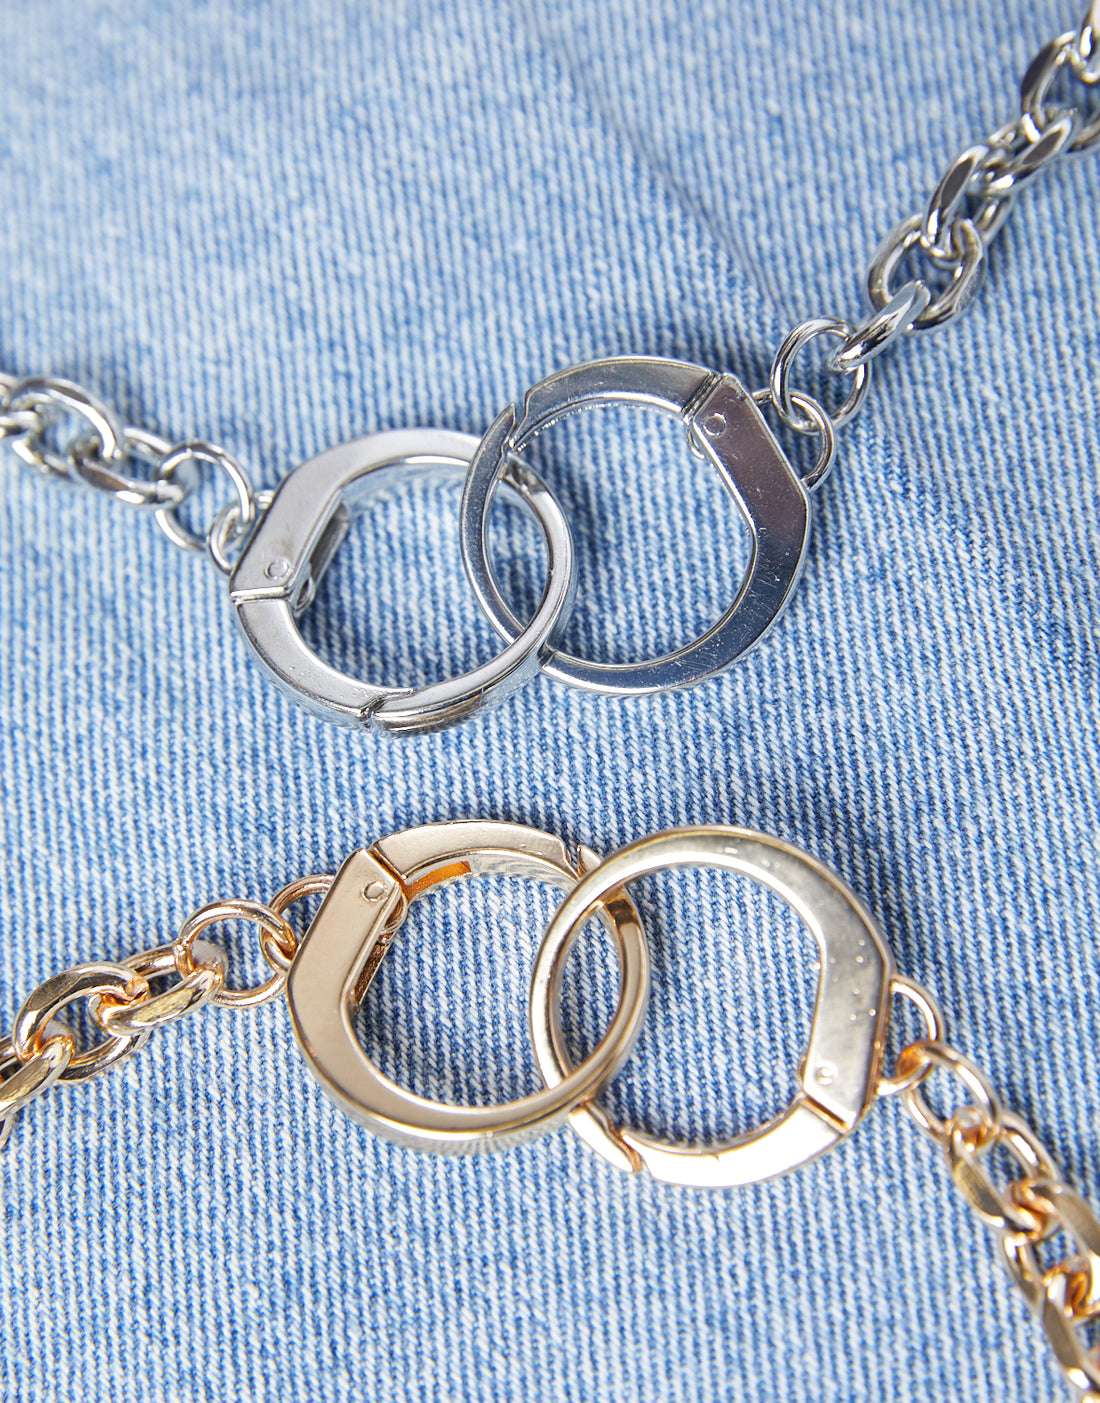 Cuffed Chain Necklace Jewelry -2020AVE